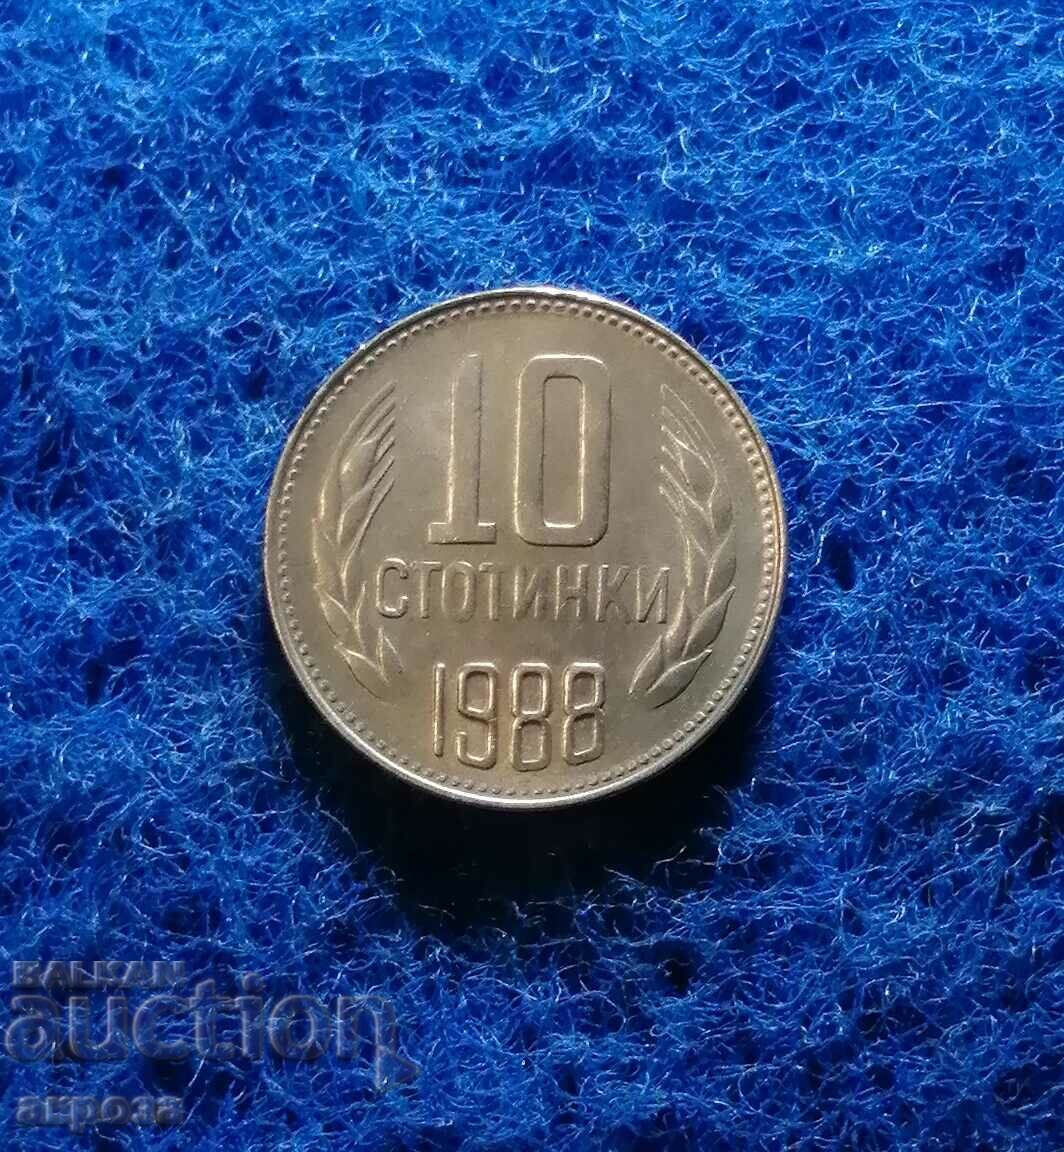 10 cents 1988